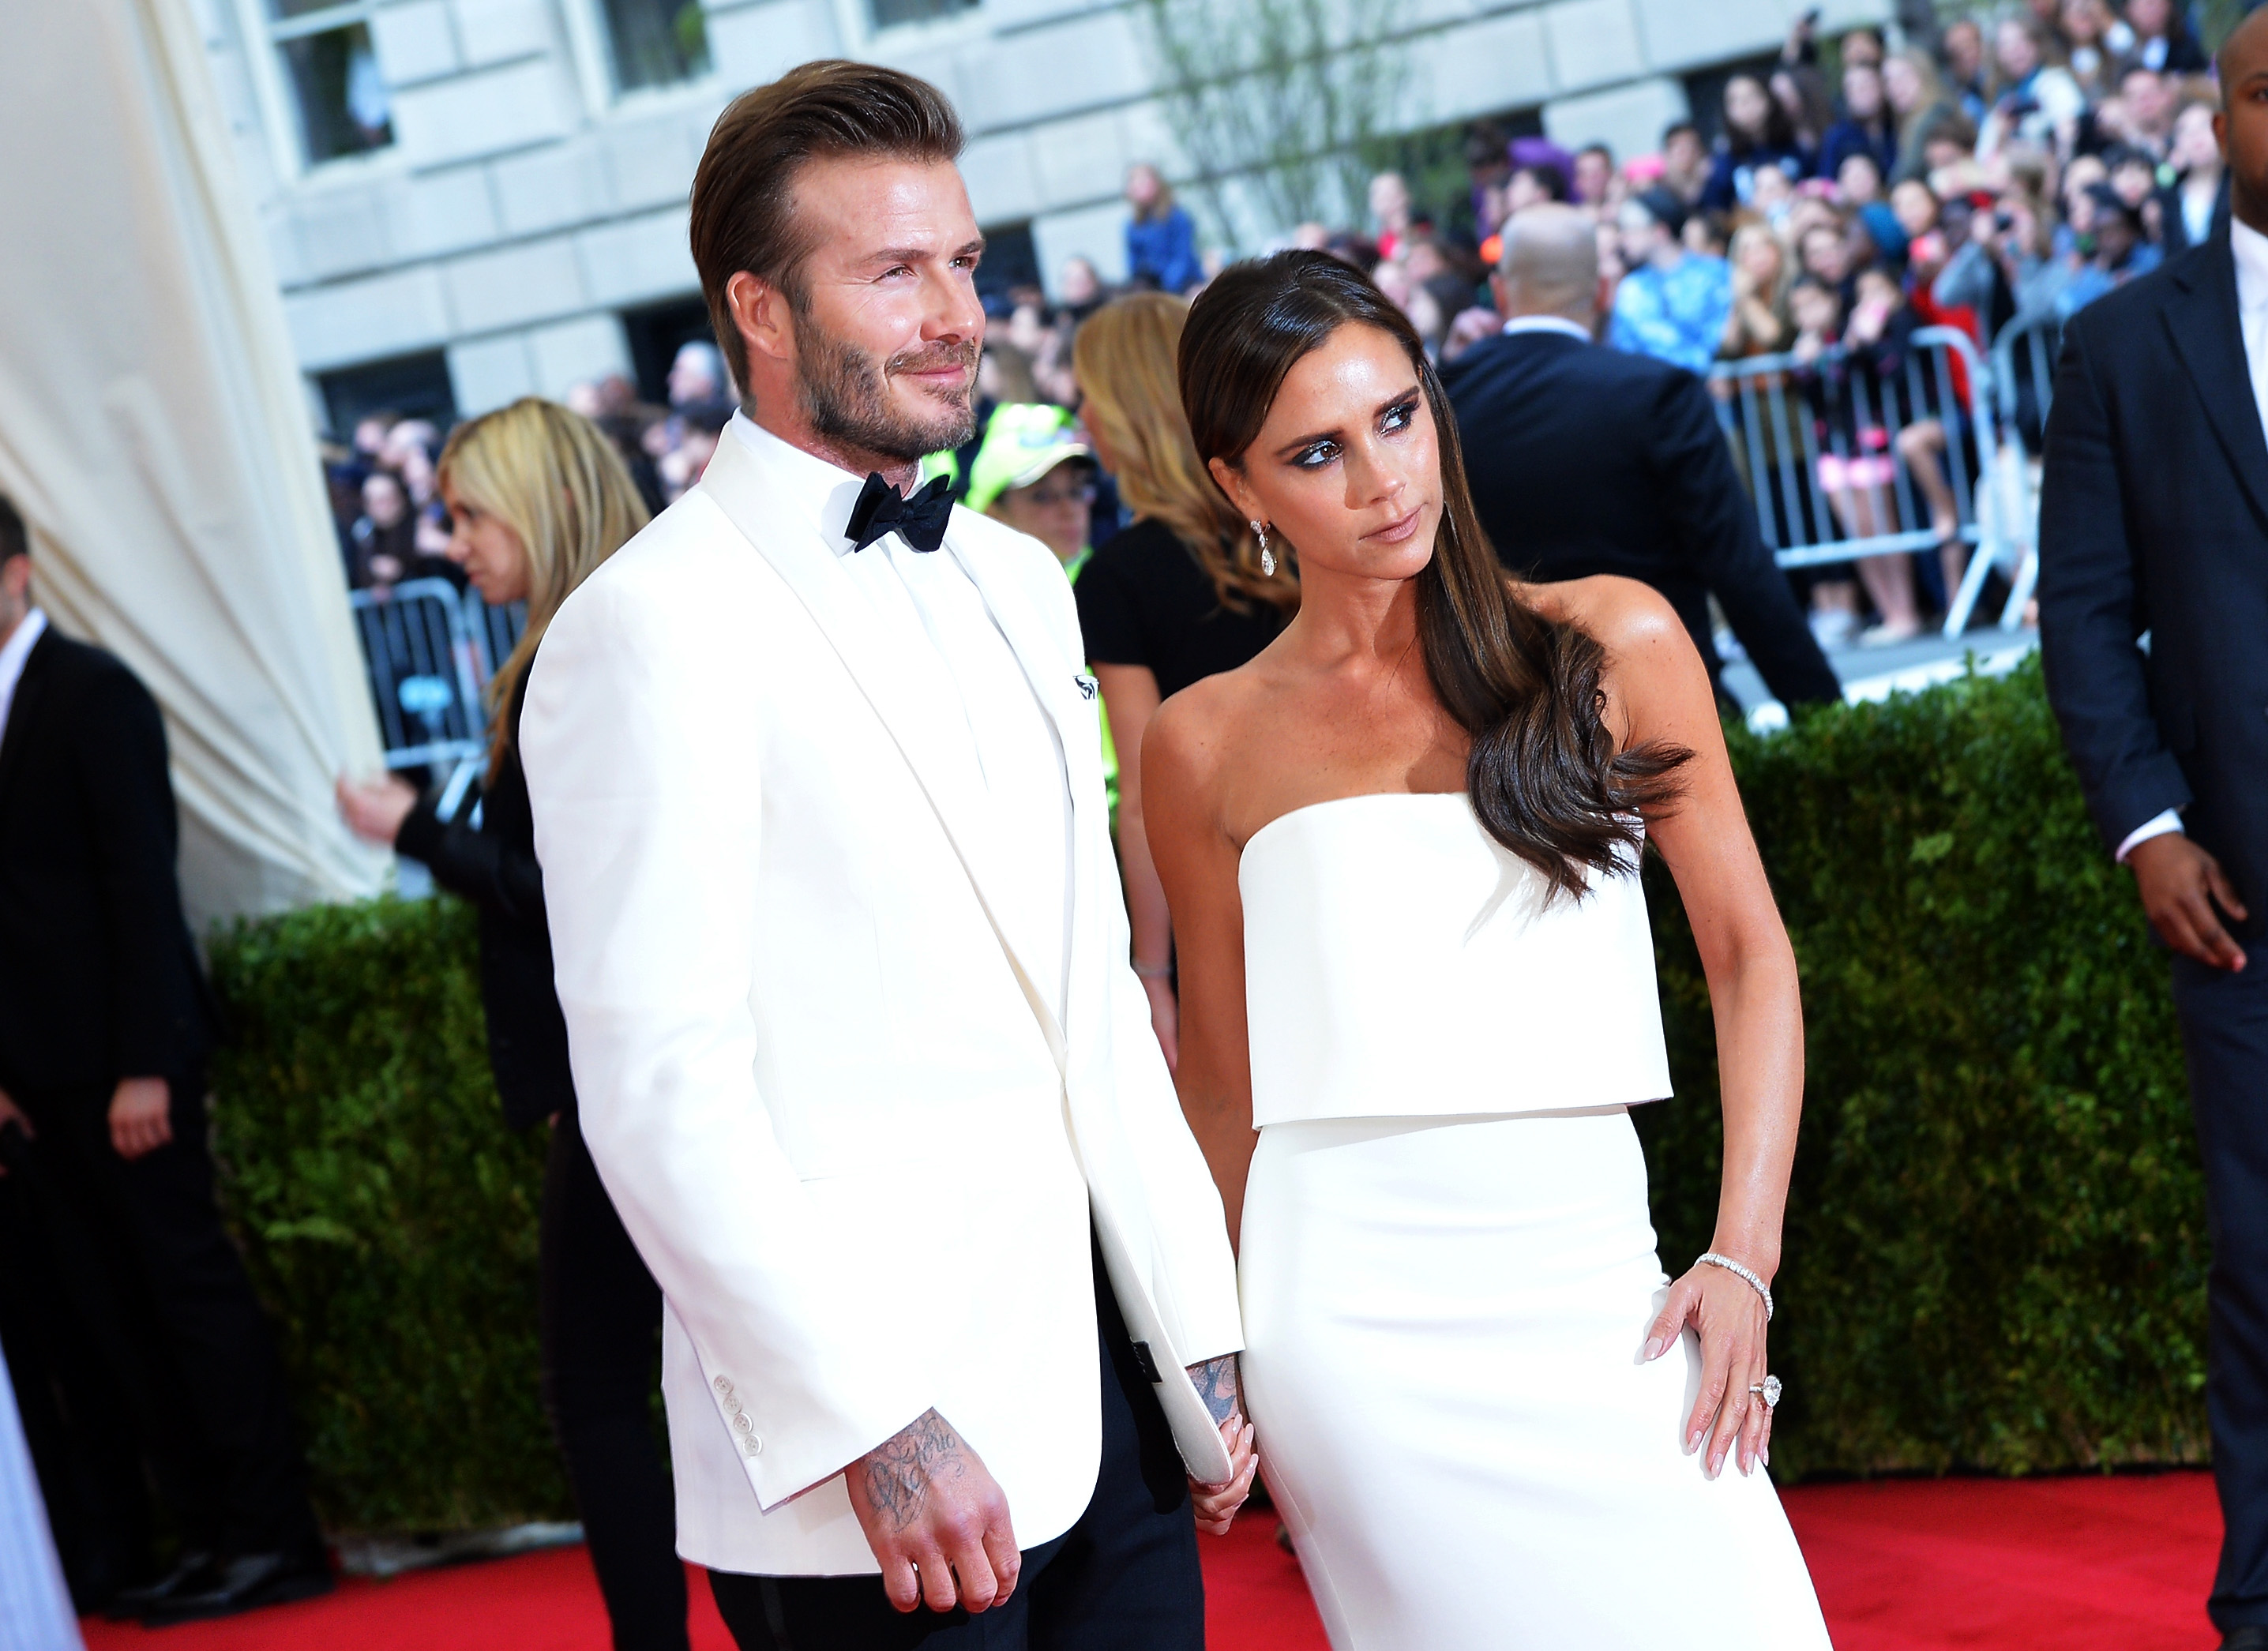 David Beckham and Victoria Beckham in New York City on May 5, 2014 | Source: Getty Images